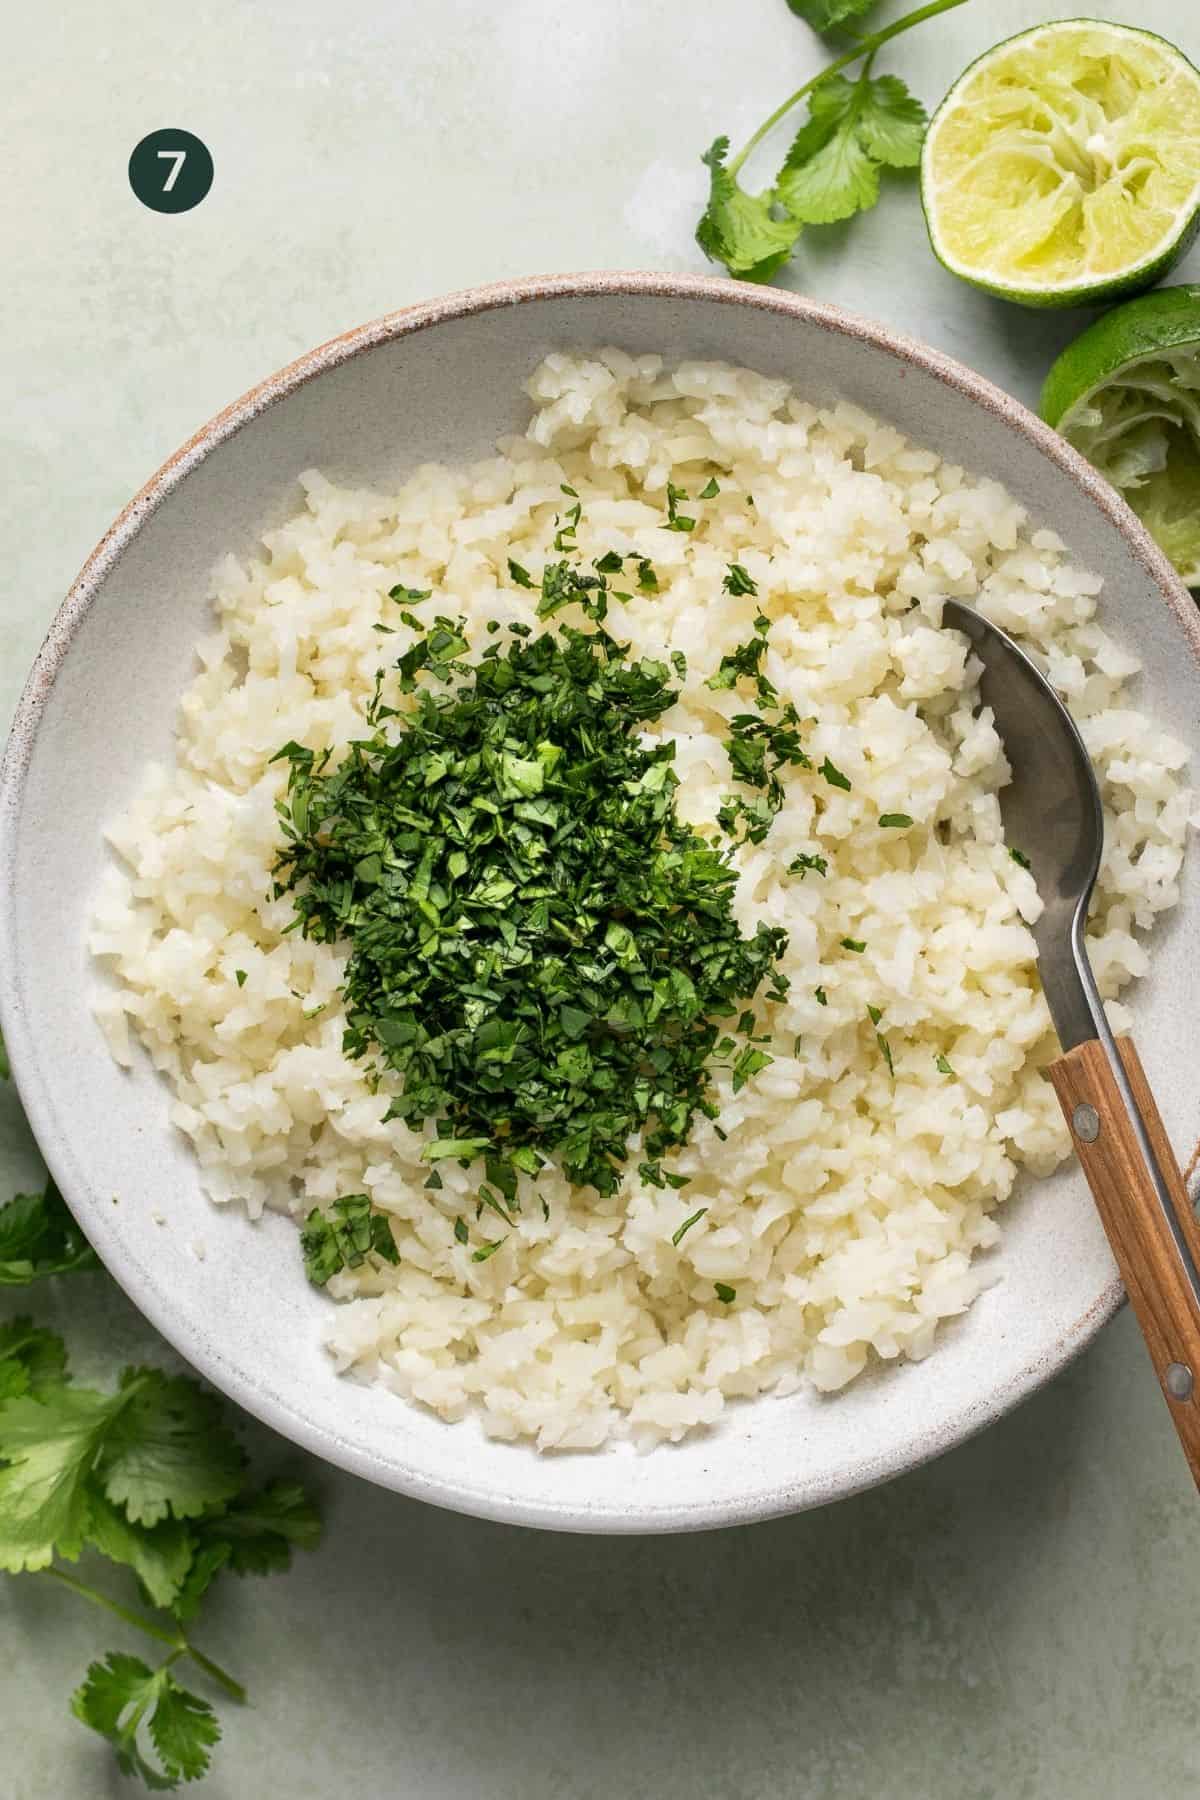 Cooked cauliflower rice, lime juice and cilantro added to a bowl to combine with a spoon.